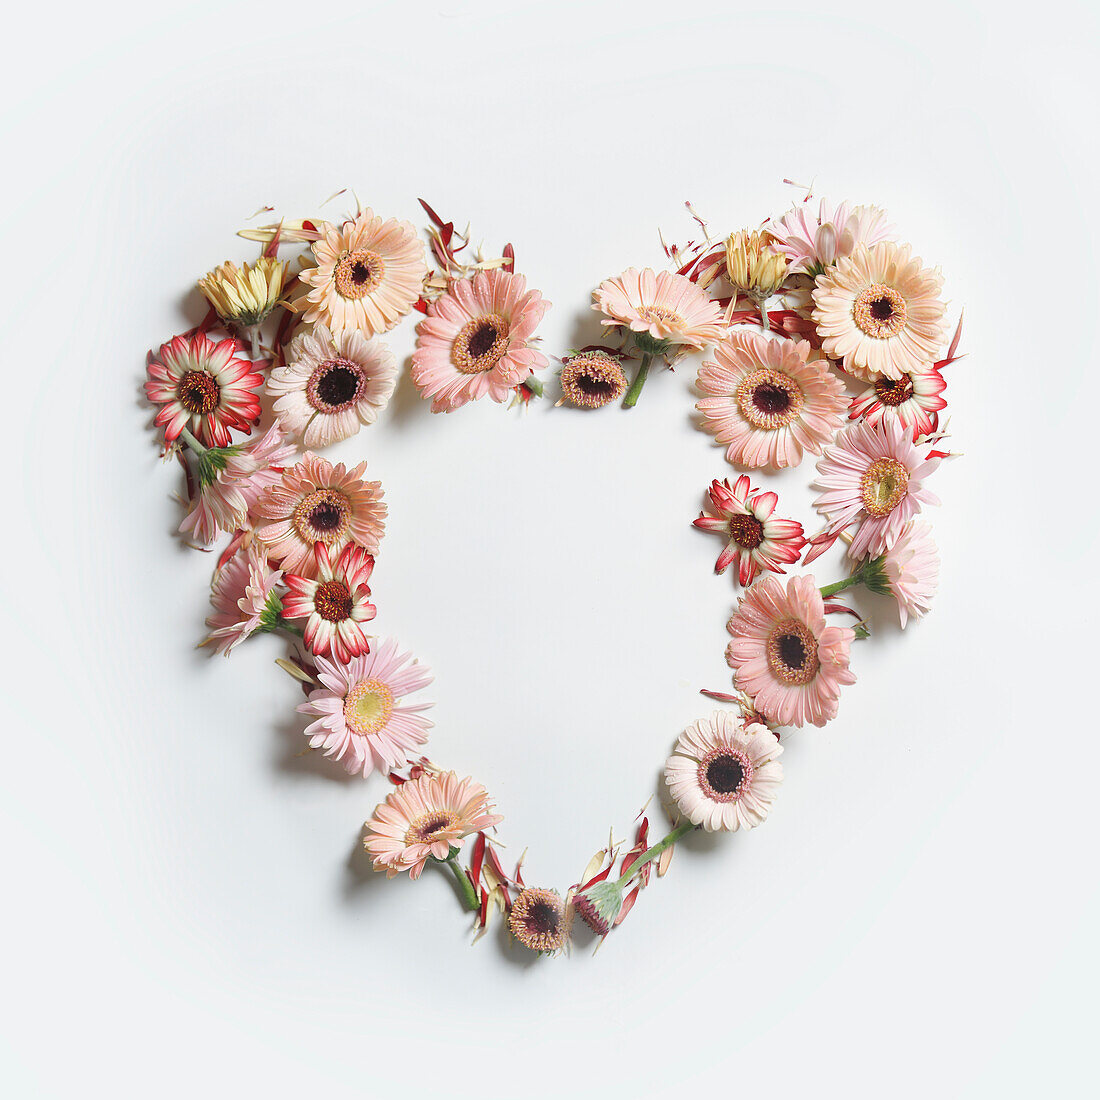 Heart frame made with various garden flowers at white background. Romantic concept with spring and summer petals for Valentine or Mother day. Top view.